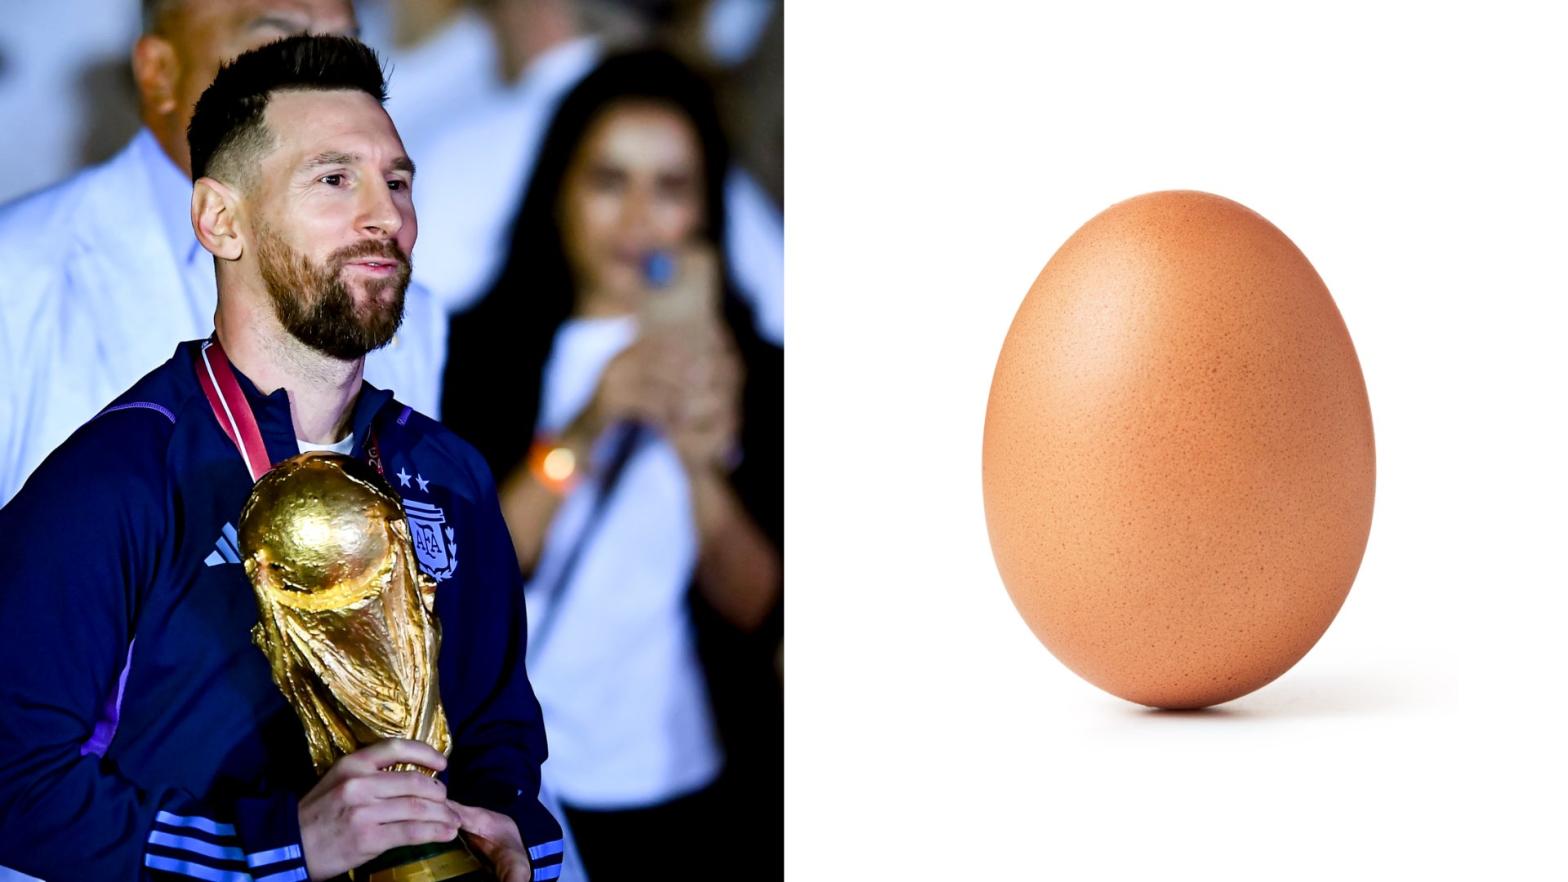 The egg held the record for most liked Instagram post for nearly four years, taking the crown from Kylie Jenner. (Image: Marcelo Endelli (Getty Images),Image: Pineapple studio (Shutterstock))